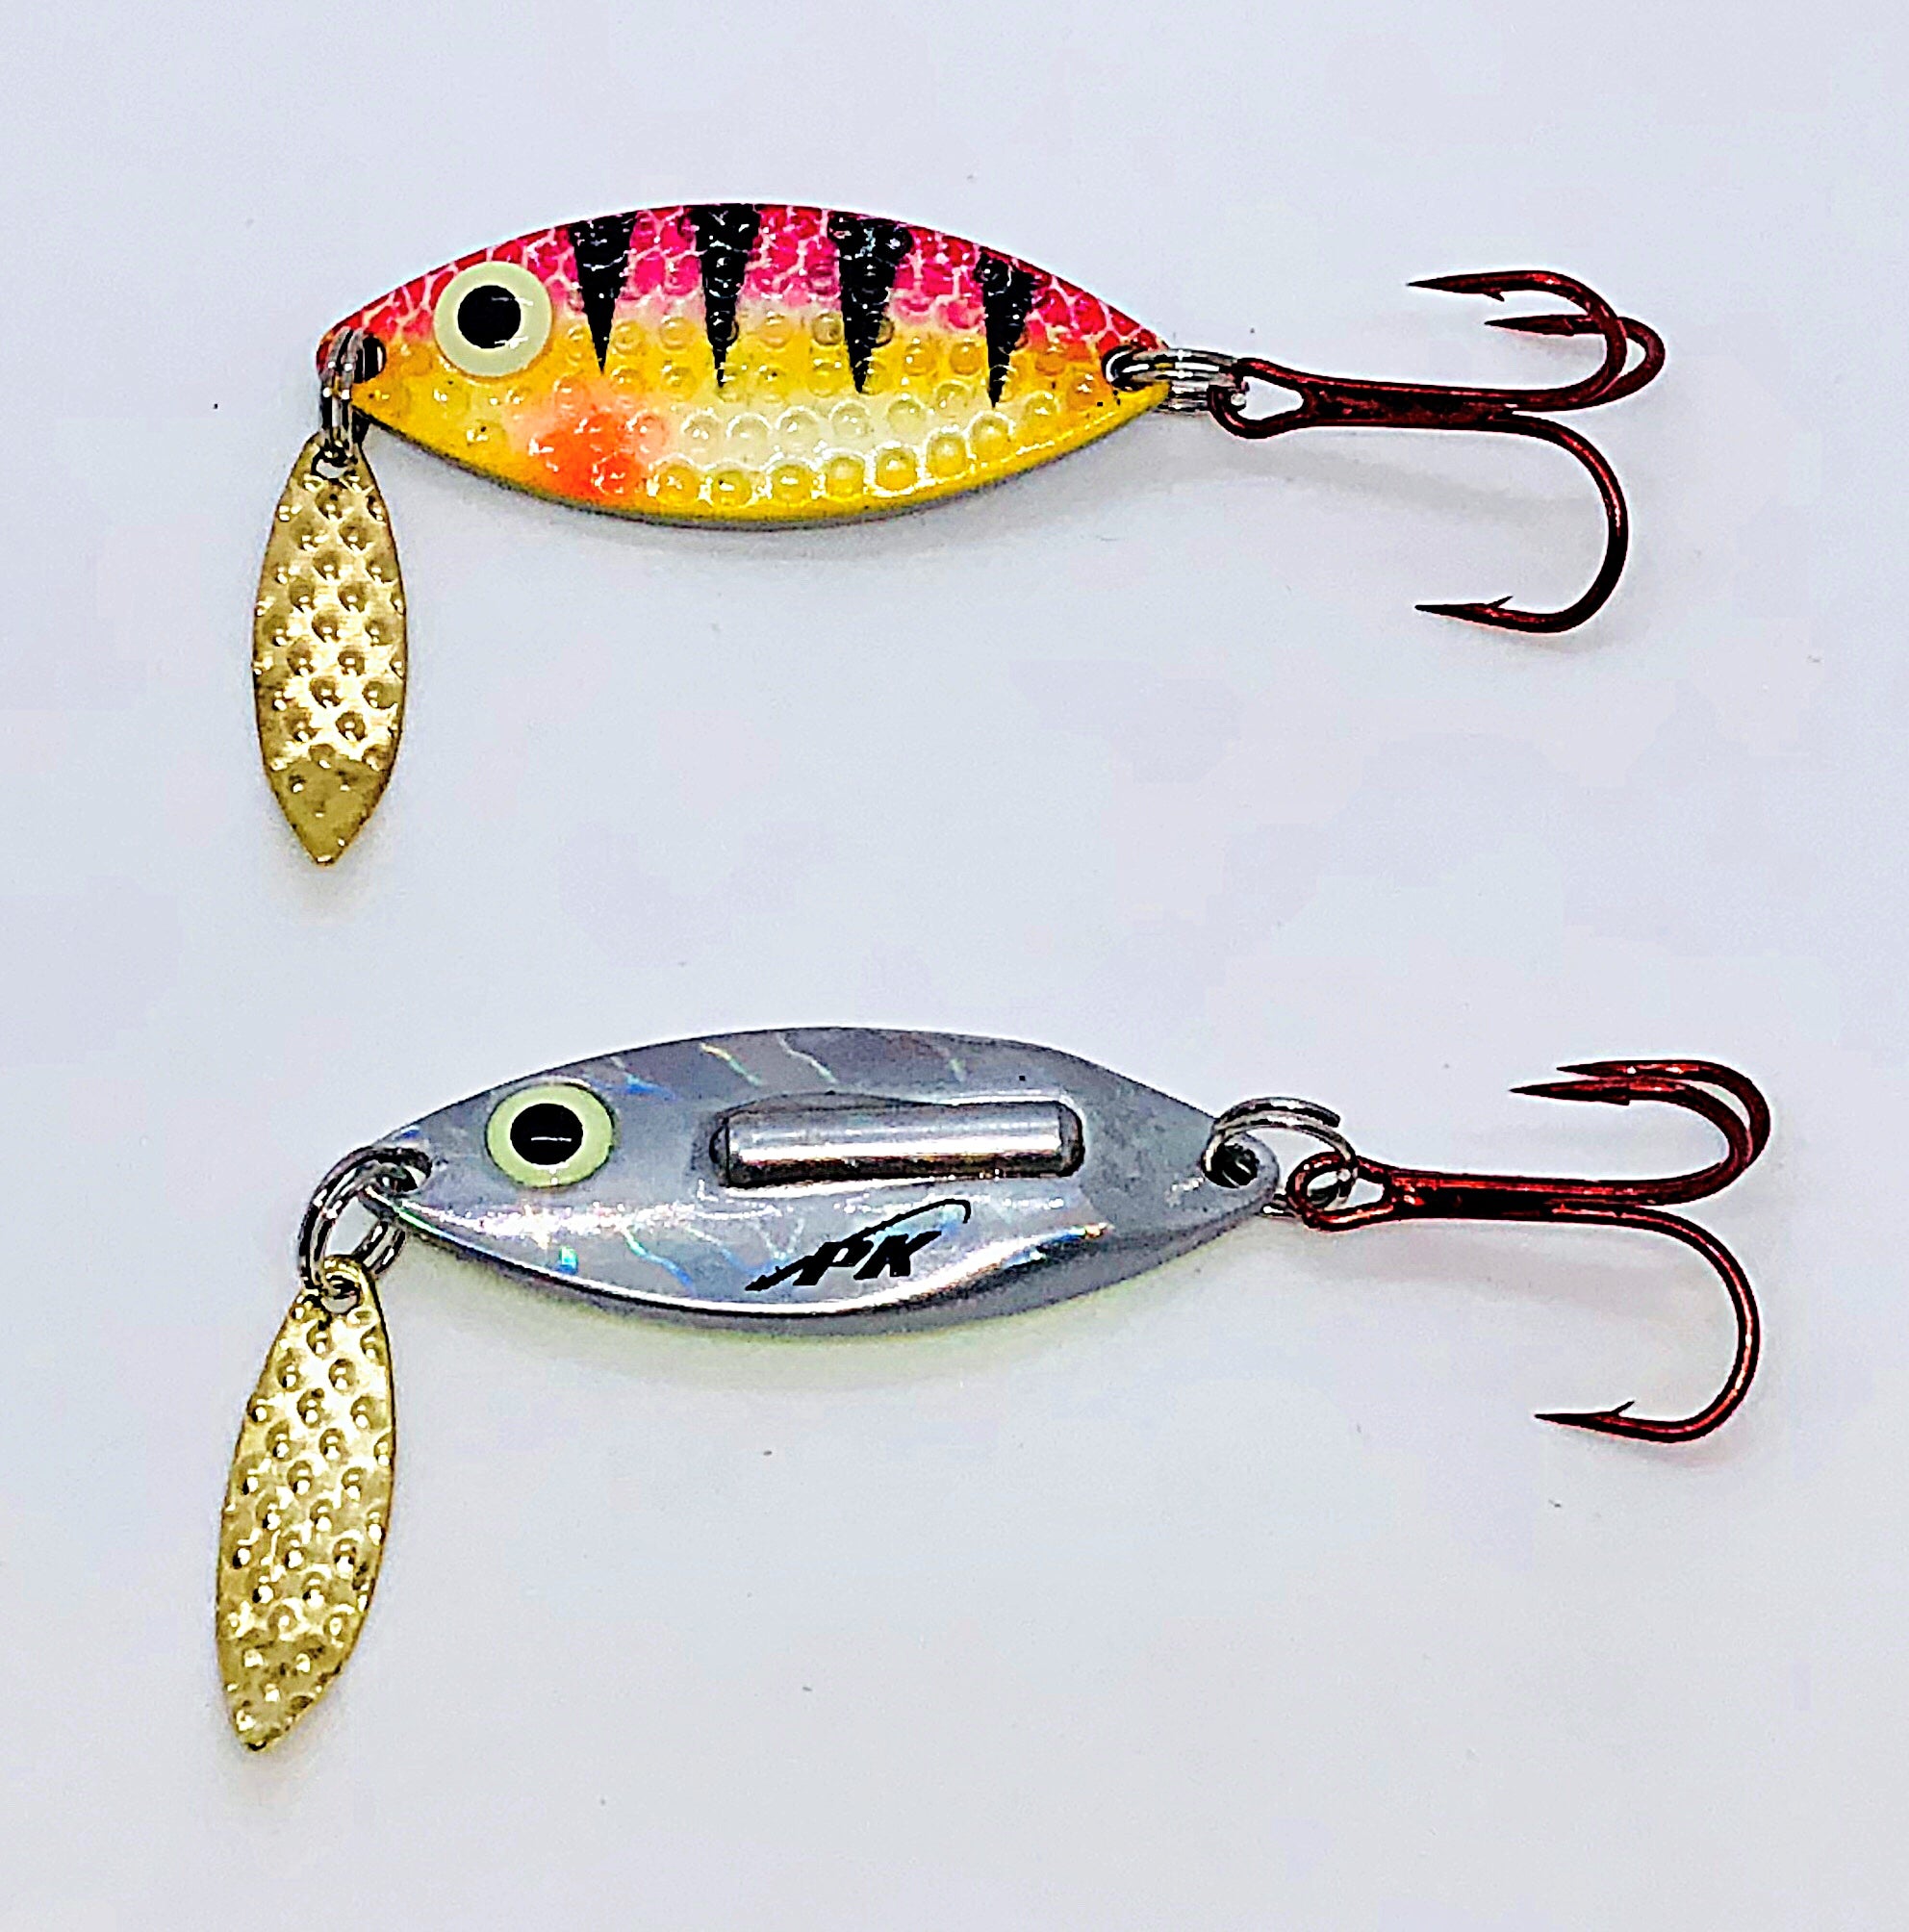 Pk Lures Rattling Spoon Red Tiger Glow; 1/4 oz.